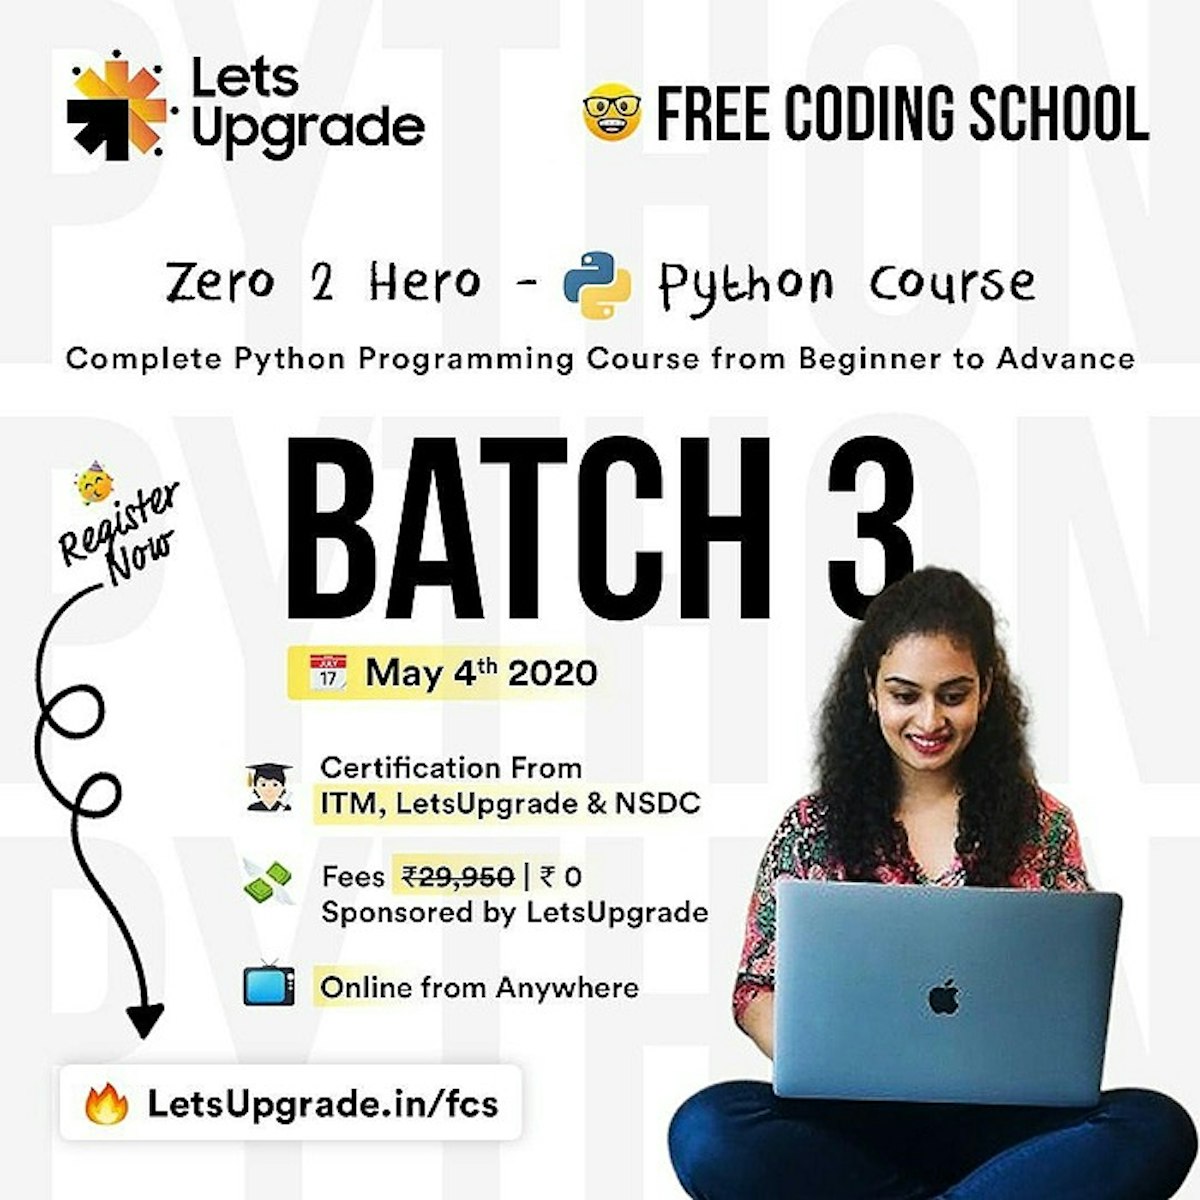 featured image - LetsUpgrade Free Coding School